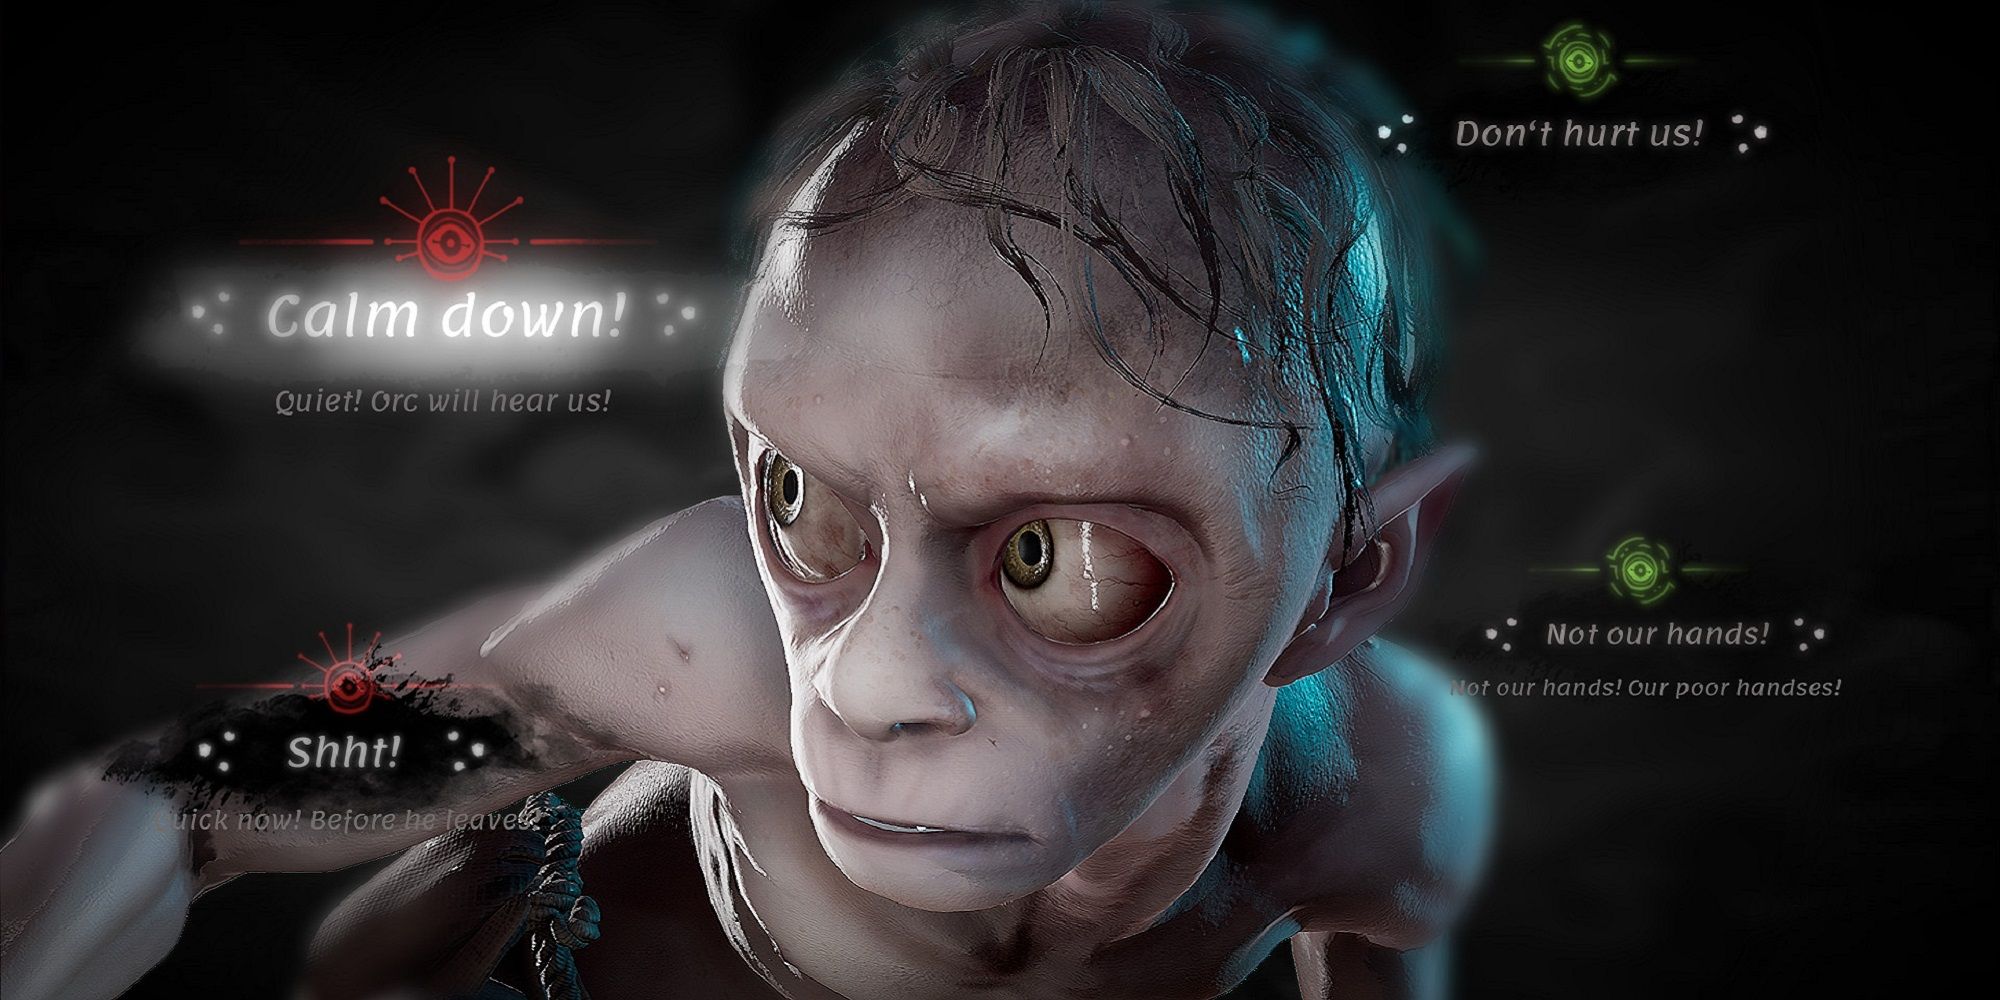 Lord of the Rings Golum Devs Explains Why Creepy Elves and Melian Play Roles